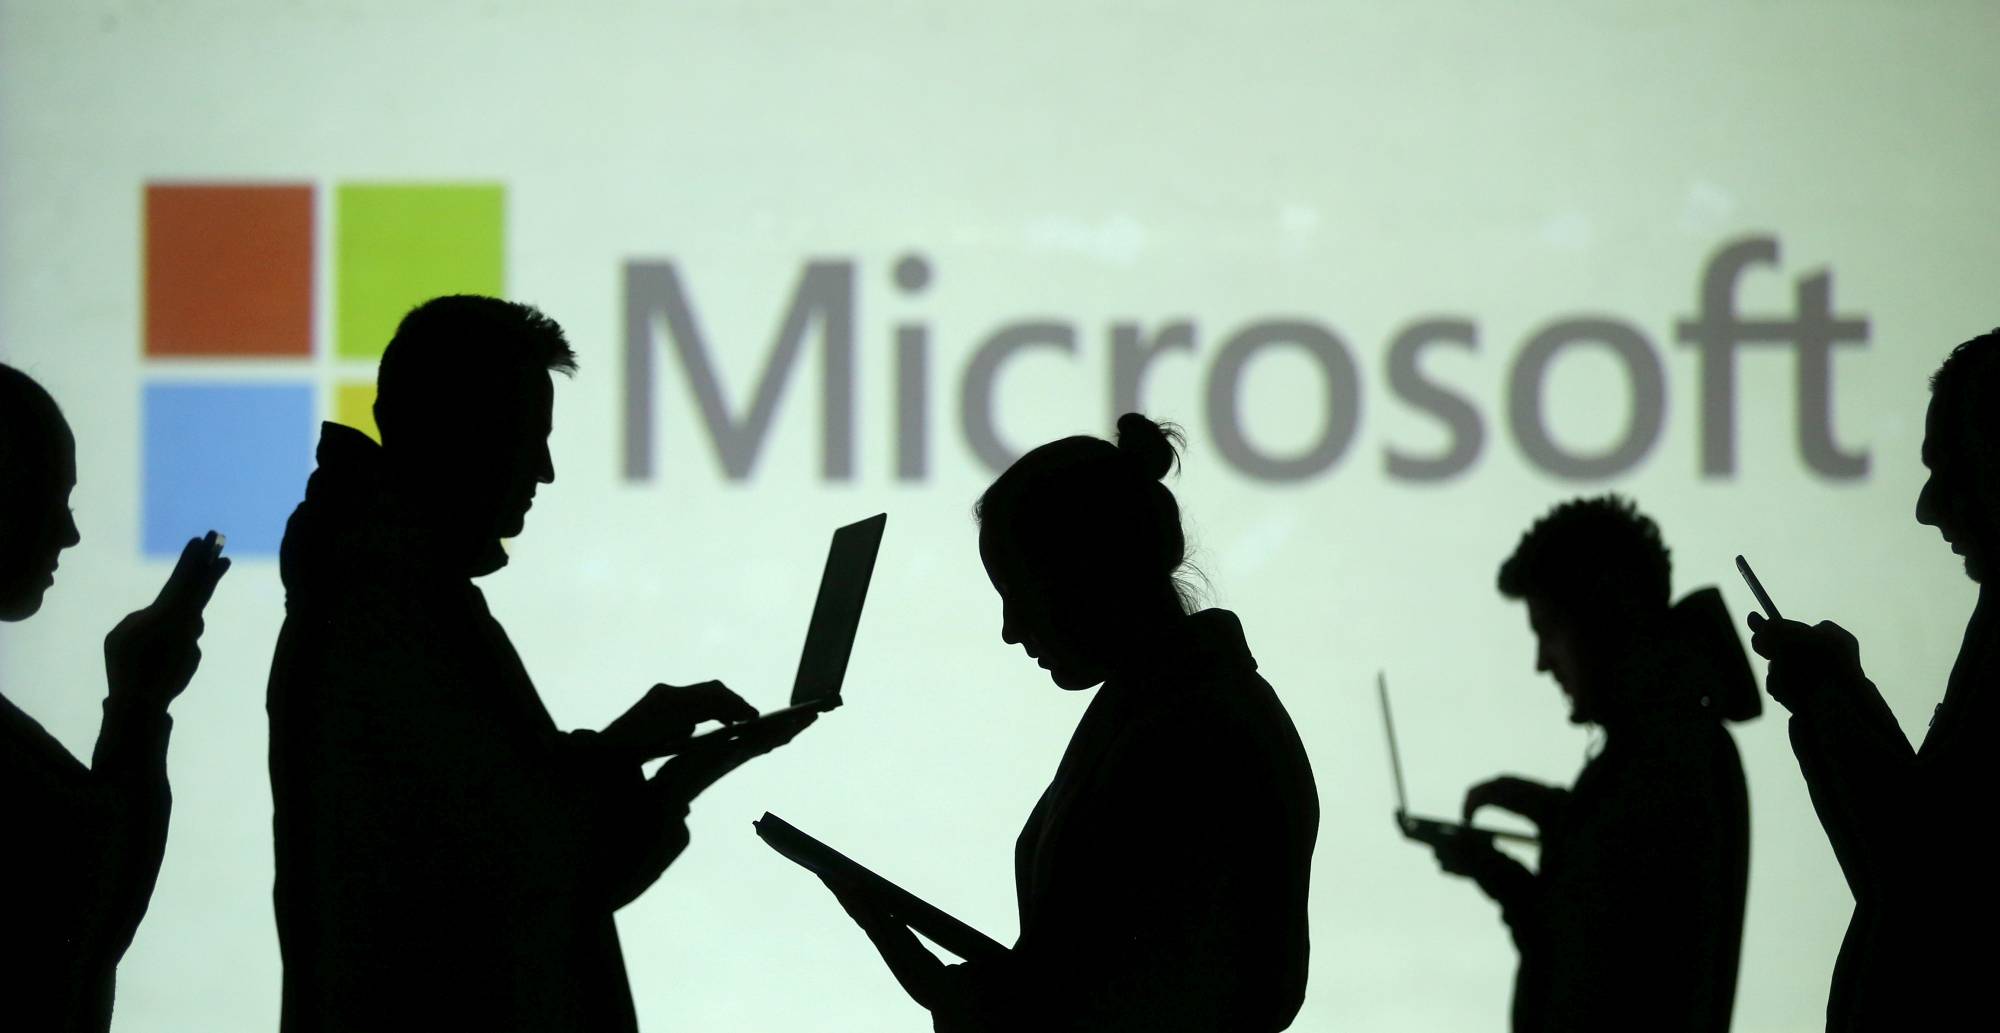 Microsoft: recent widespread outage caused by an update, not cyber-attack